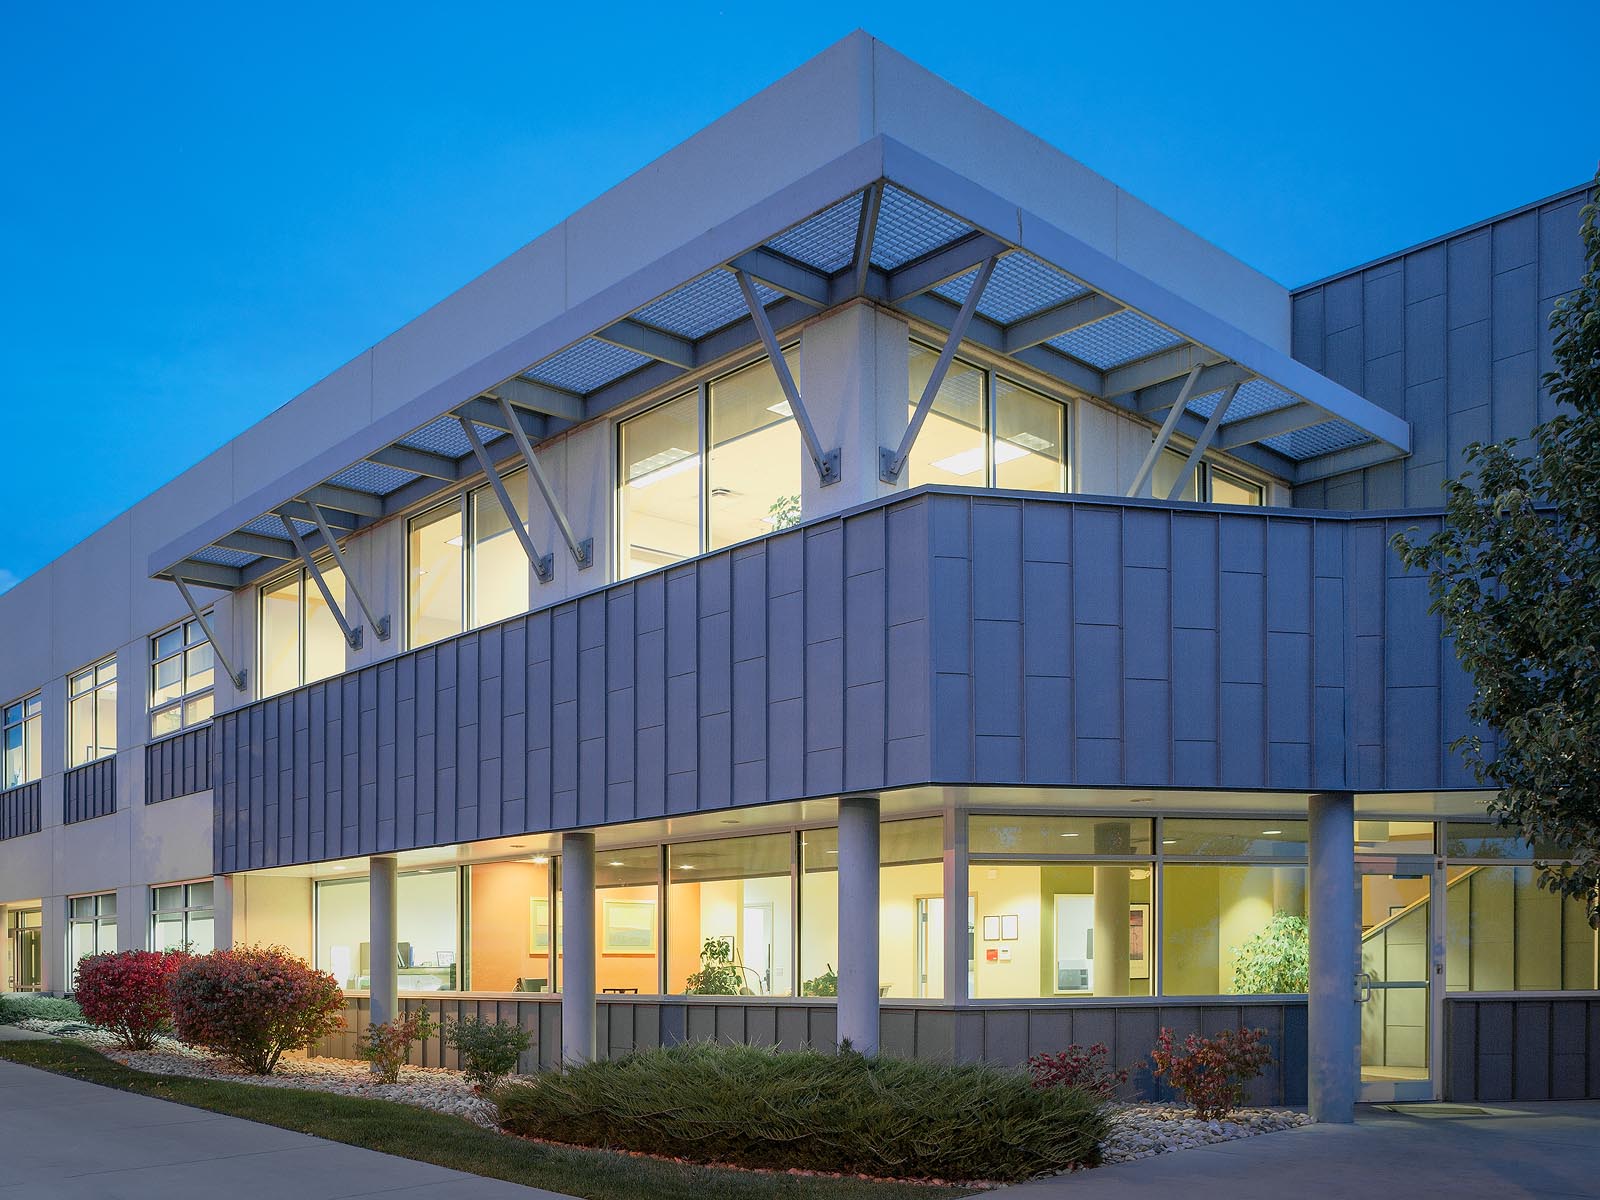 Office Exterior at Dusk - Waste Management - Diggles Photography